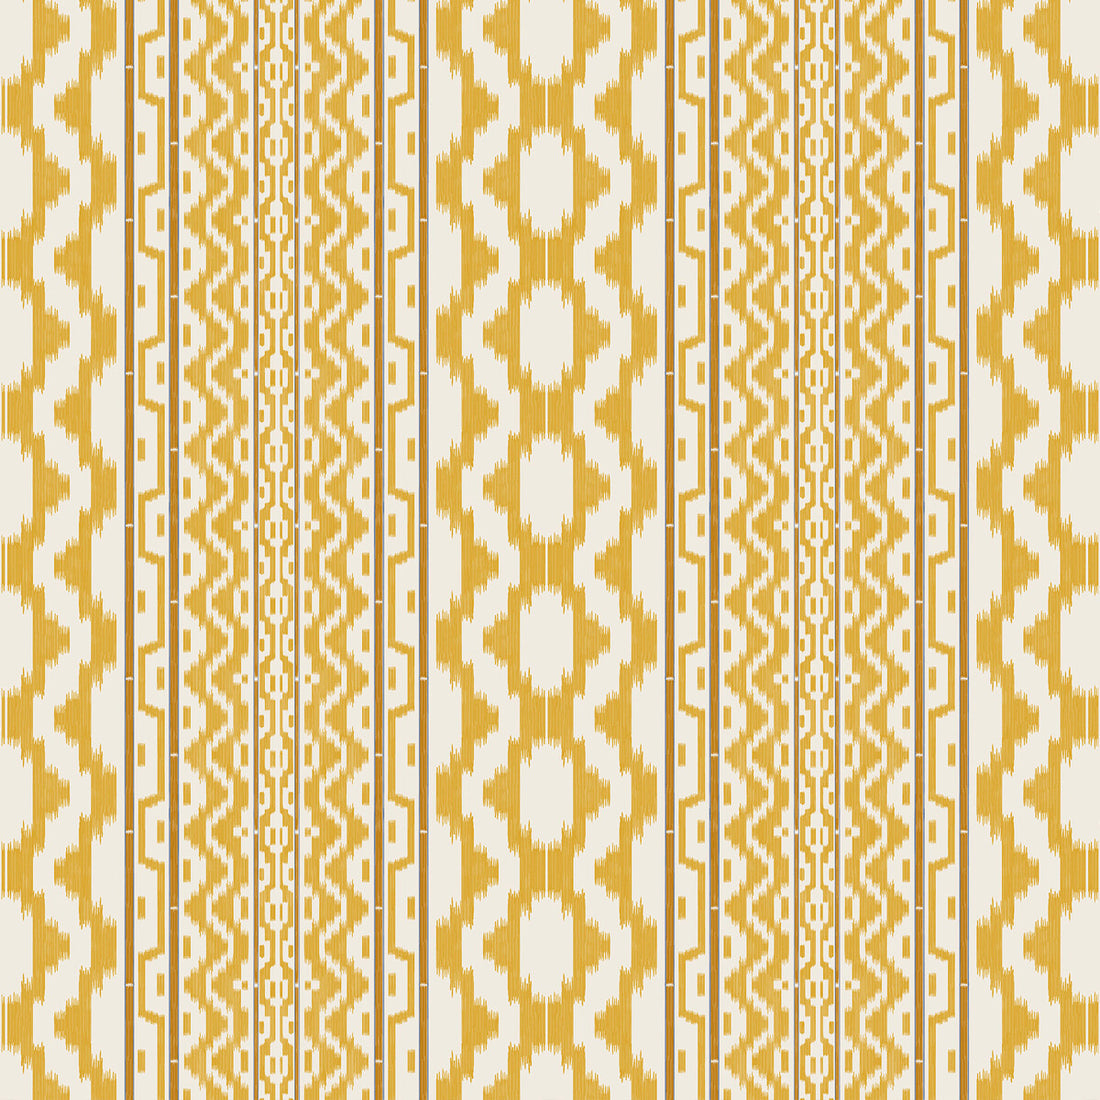 Cala Murada fabric in ocre color - pattern GDT5682.005.0 - by Gaston y Daniela in the Gaston Maiorica collection